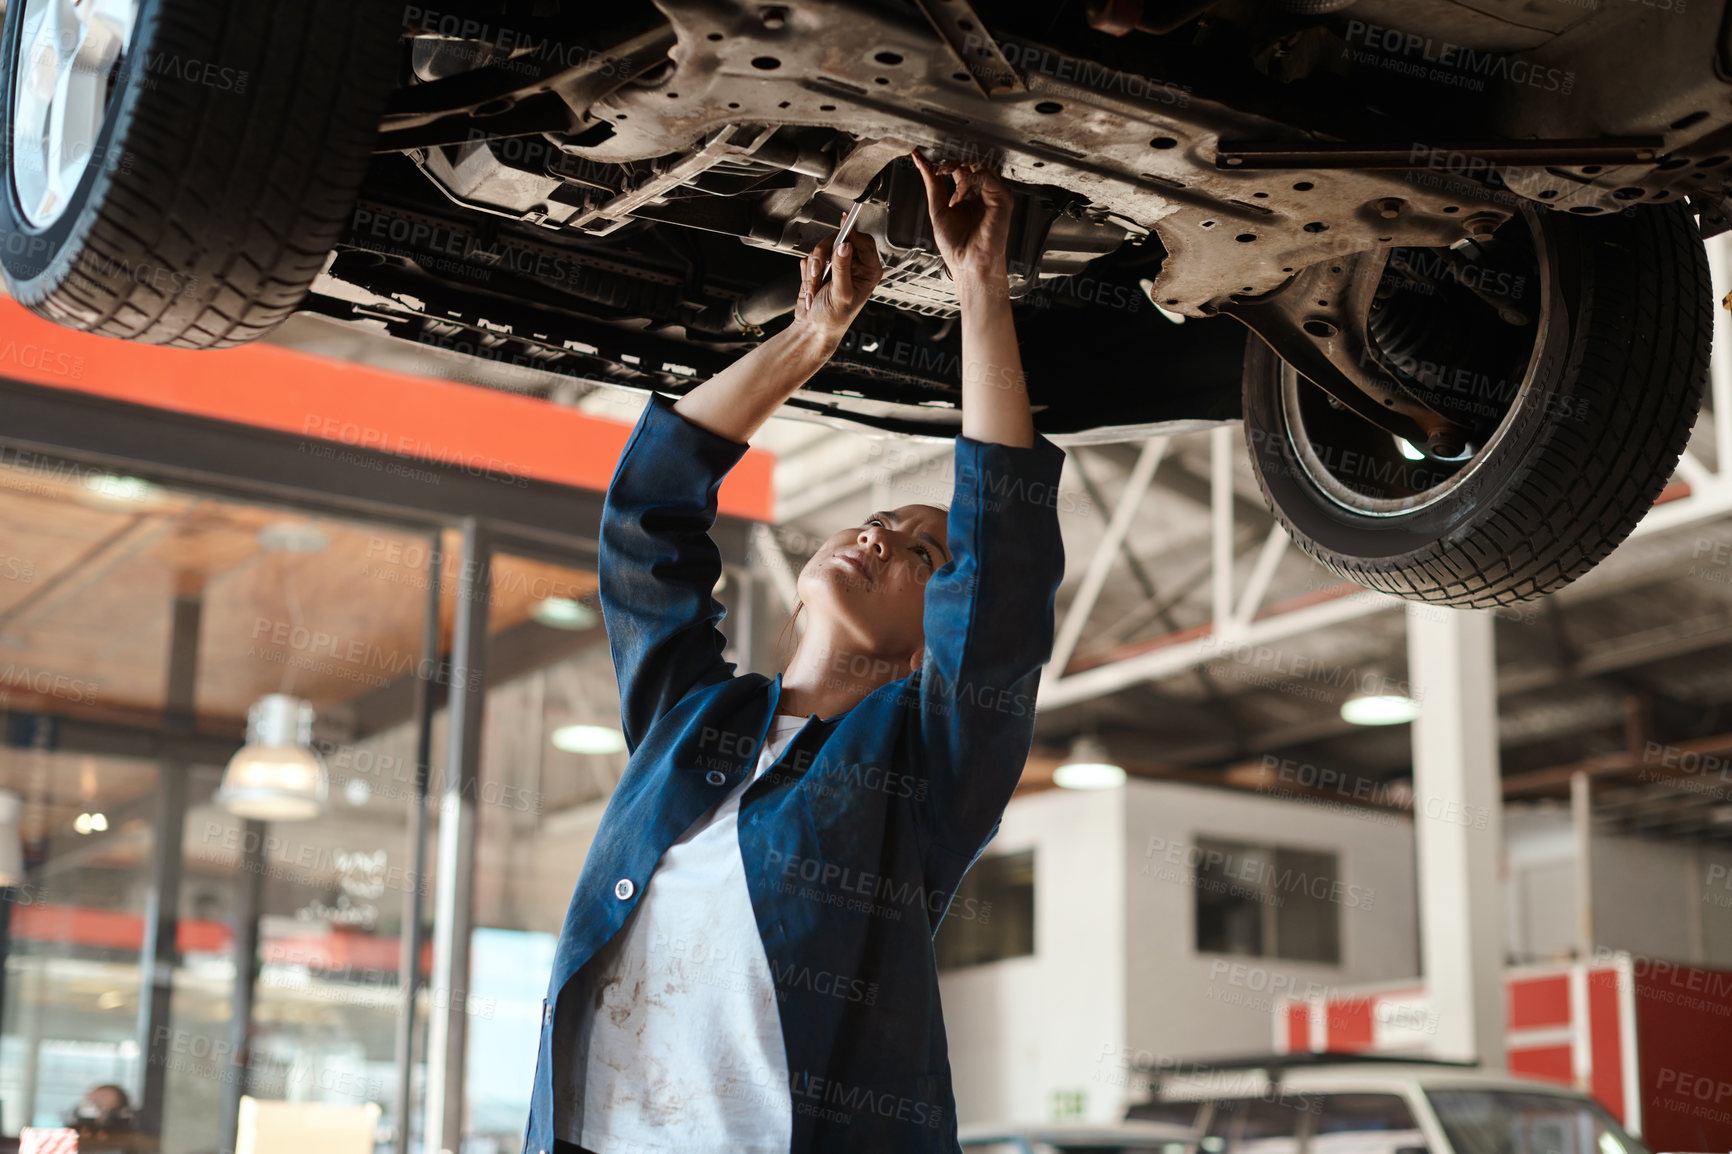 Buy stock photo Shot of a female mechanic working under a lifted car